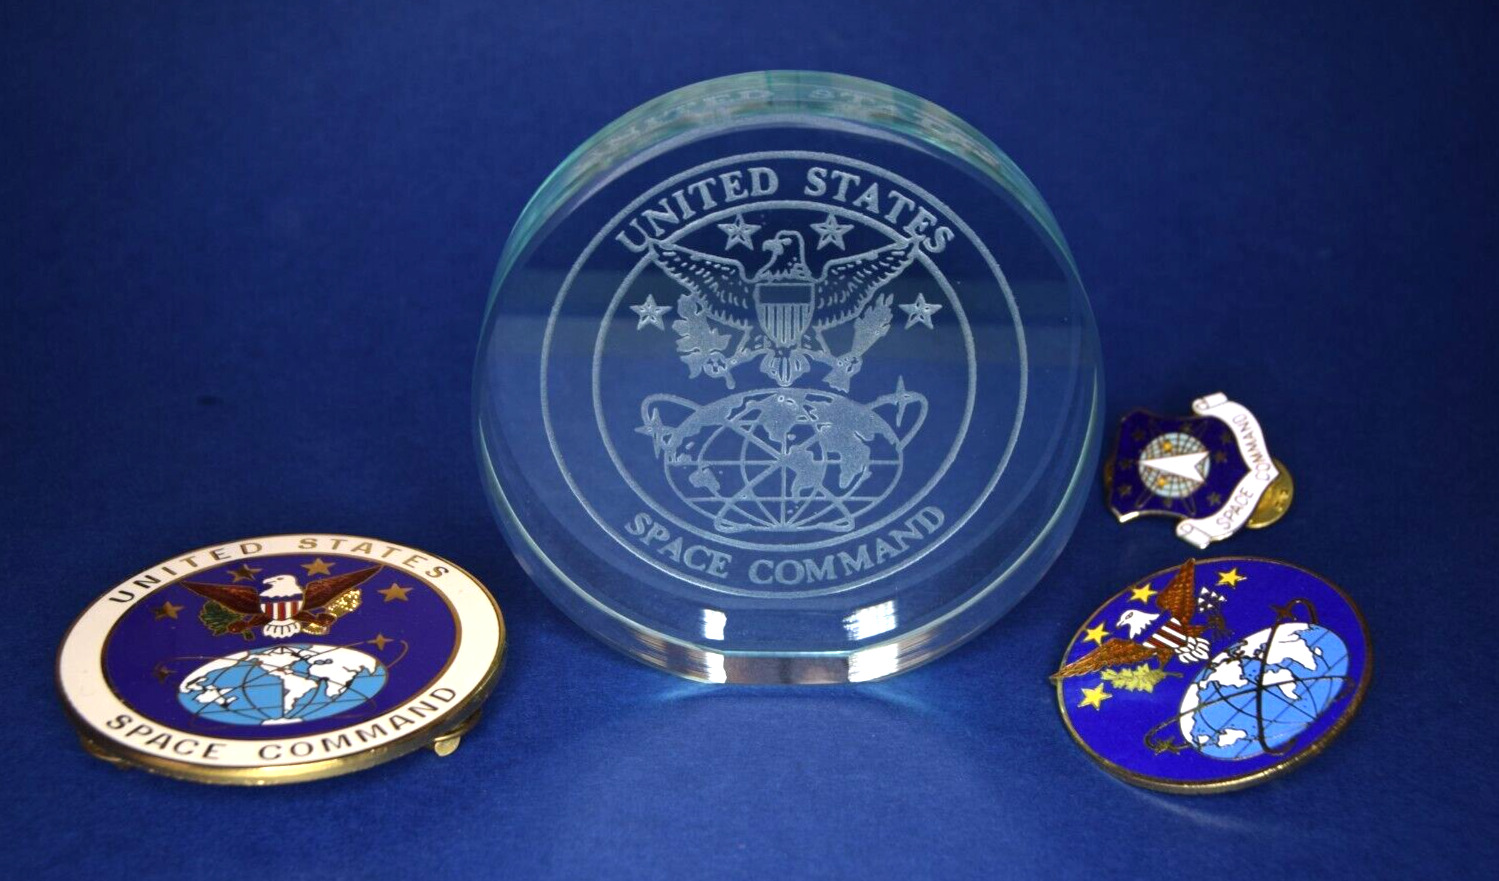 RARE Vintage U.S. Space Command Badge Insignia Desk Medal/Paperweight Lot Force